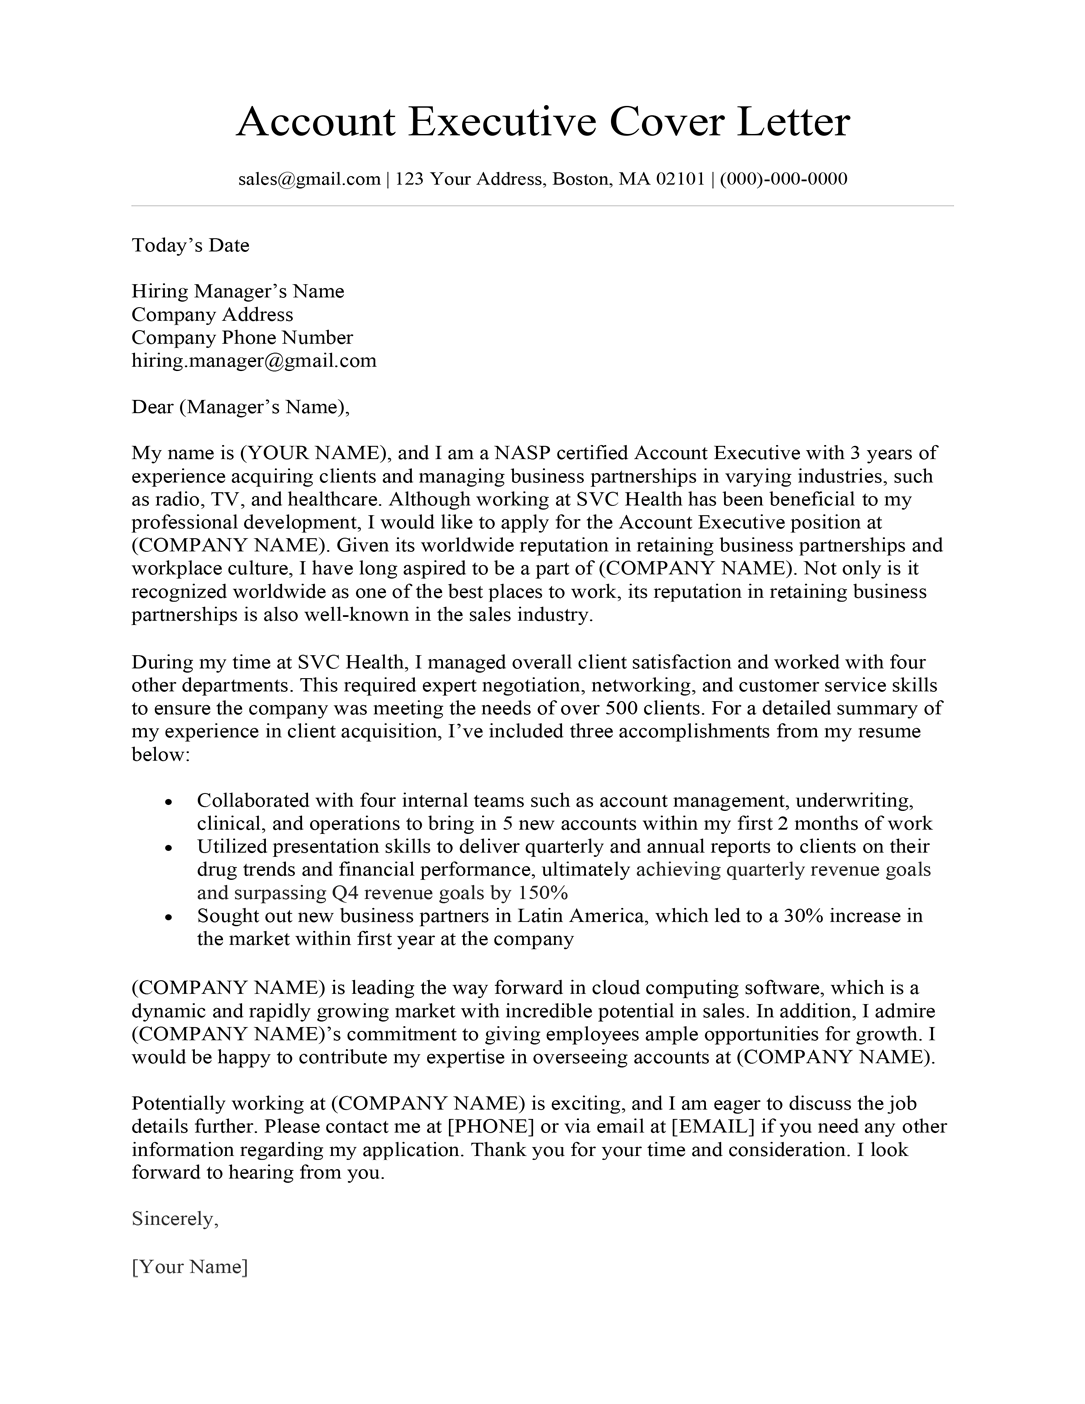 Sample Cover Letter For Management Position from resumecompanion.com